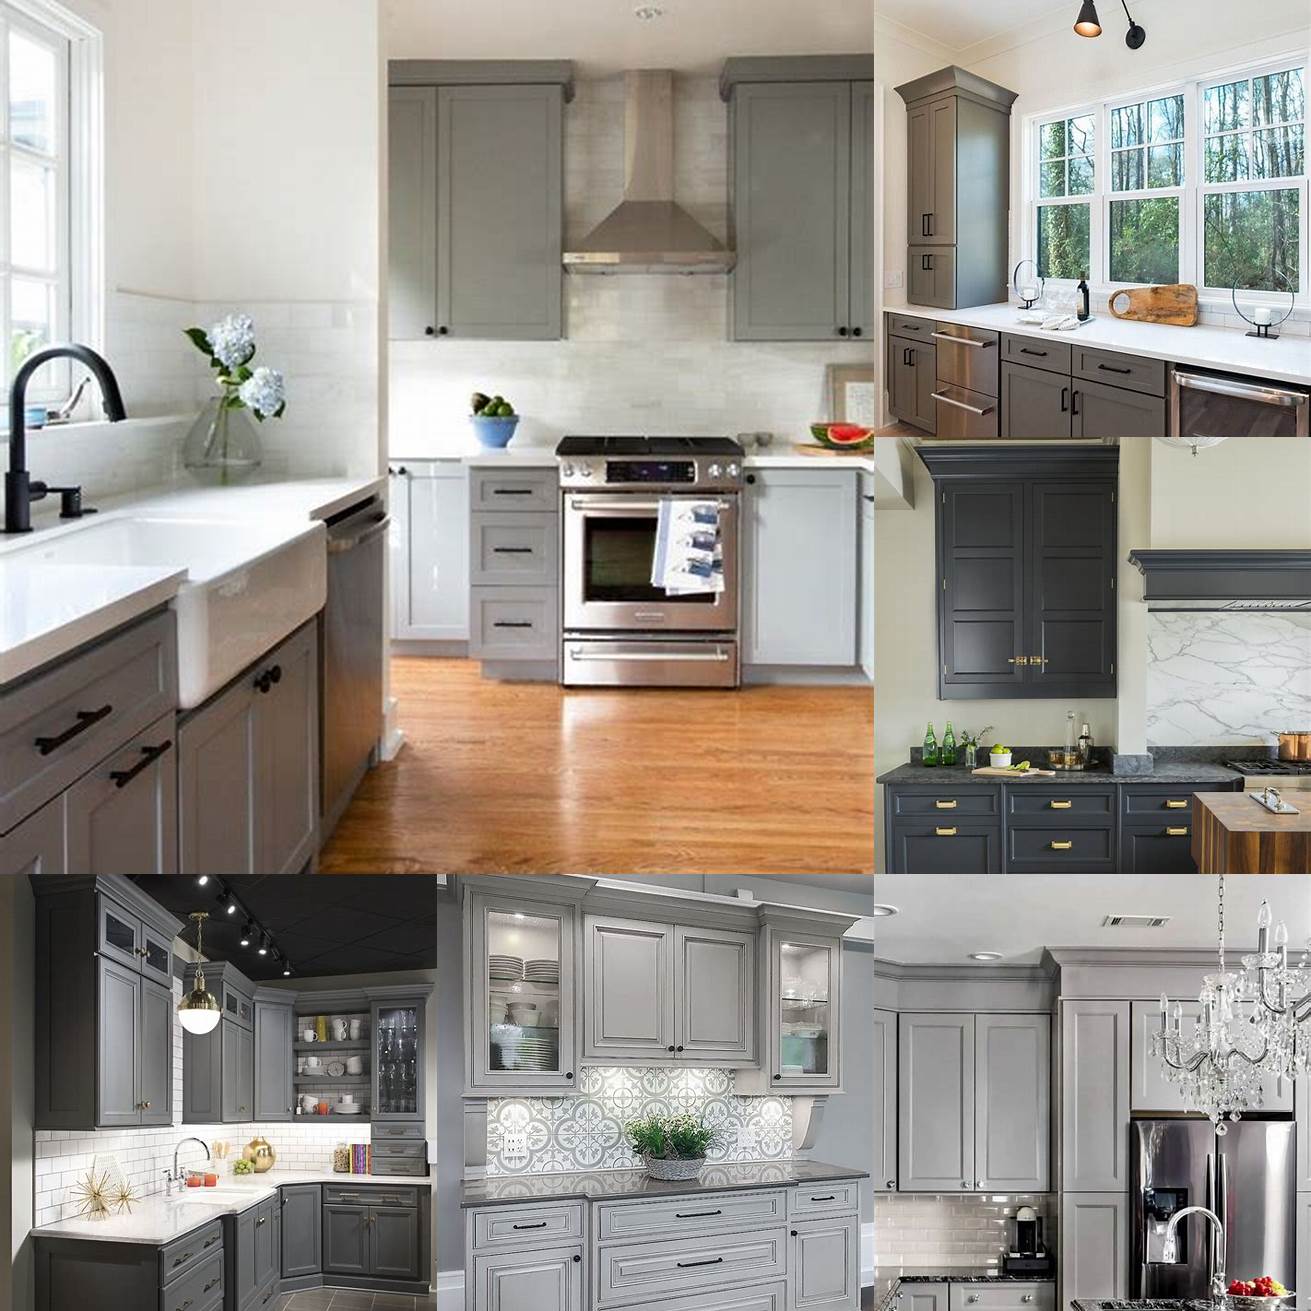 Gray kitchen cabinets with black hardware and fixtures